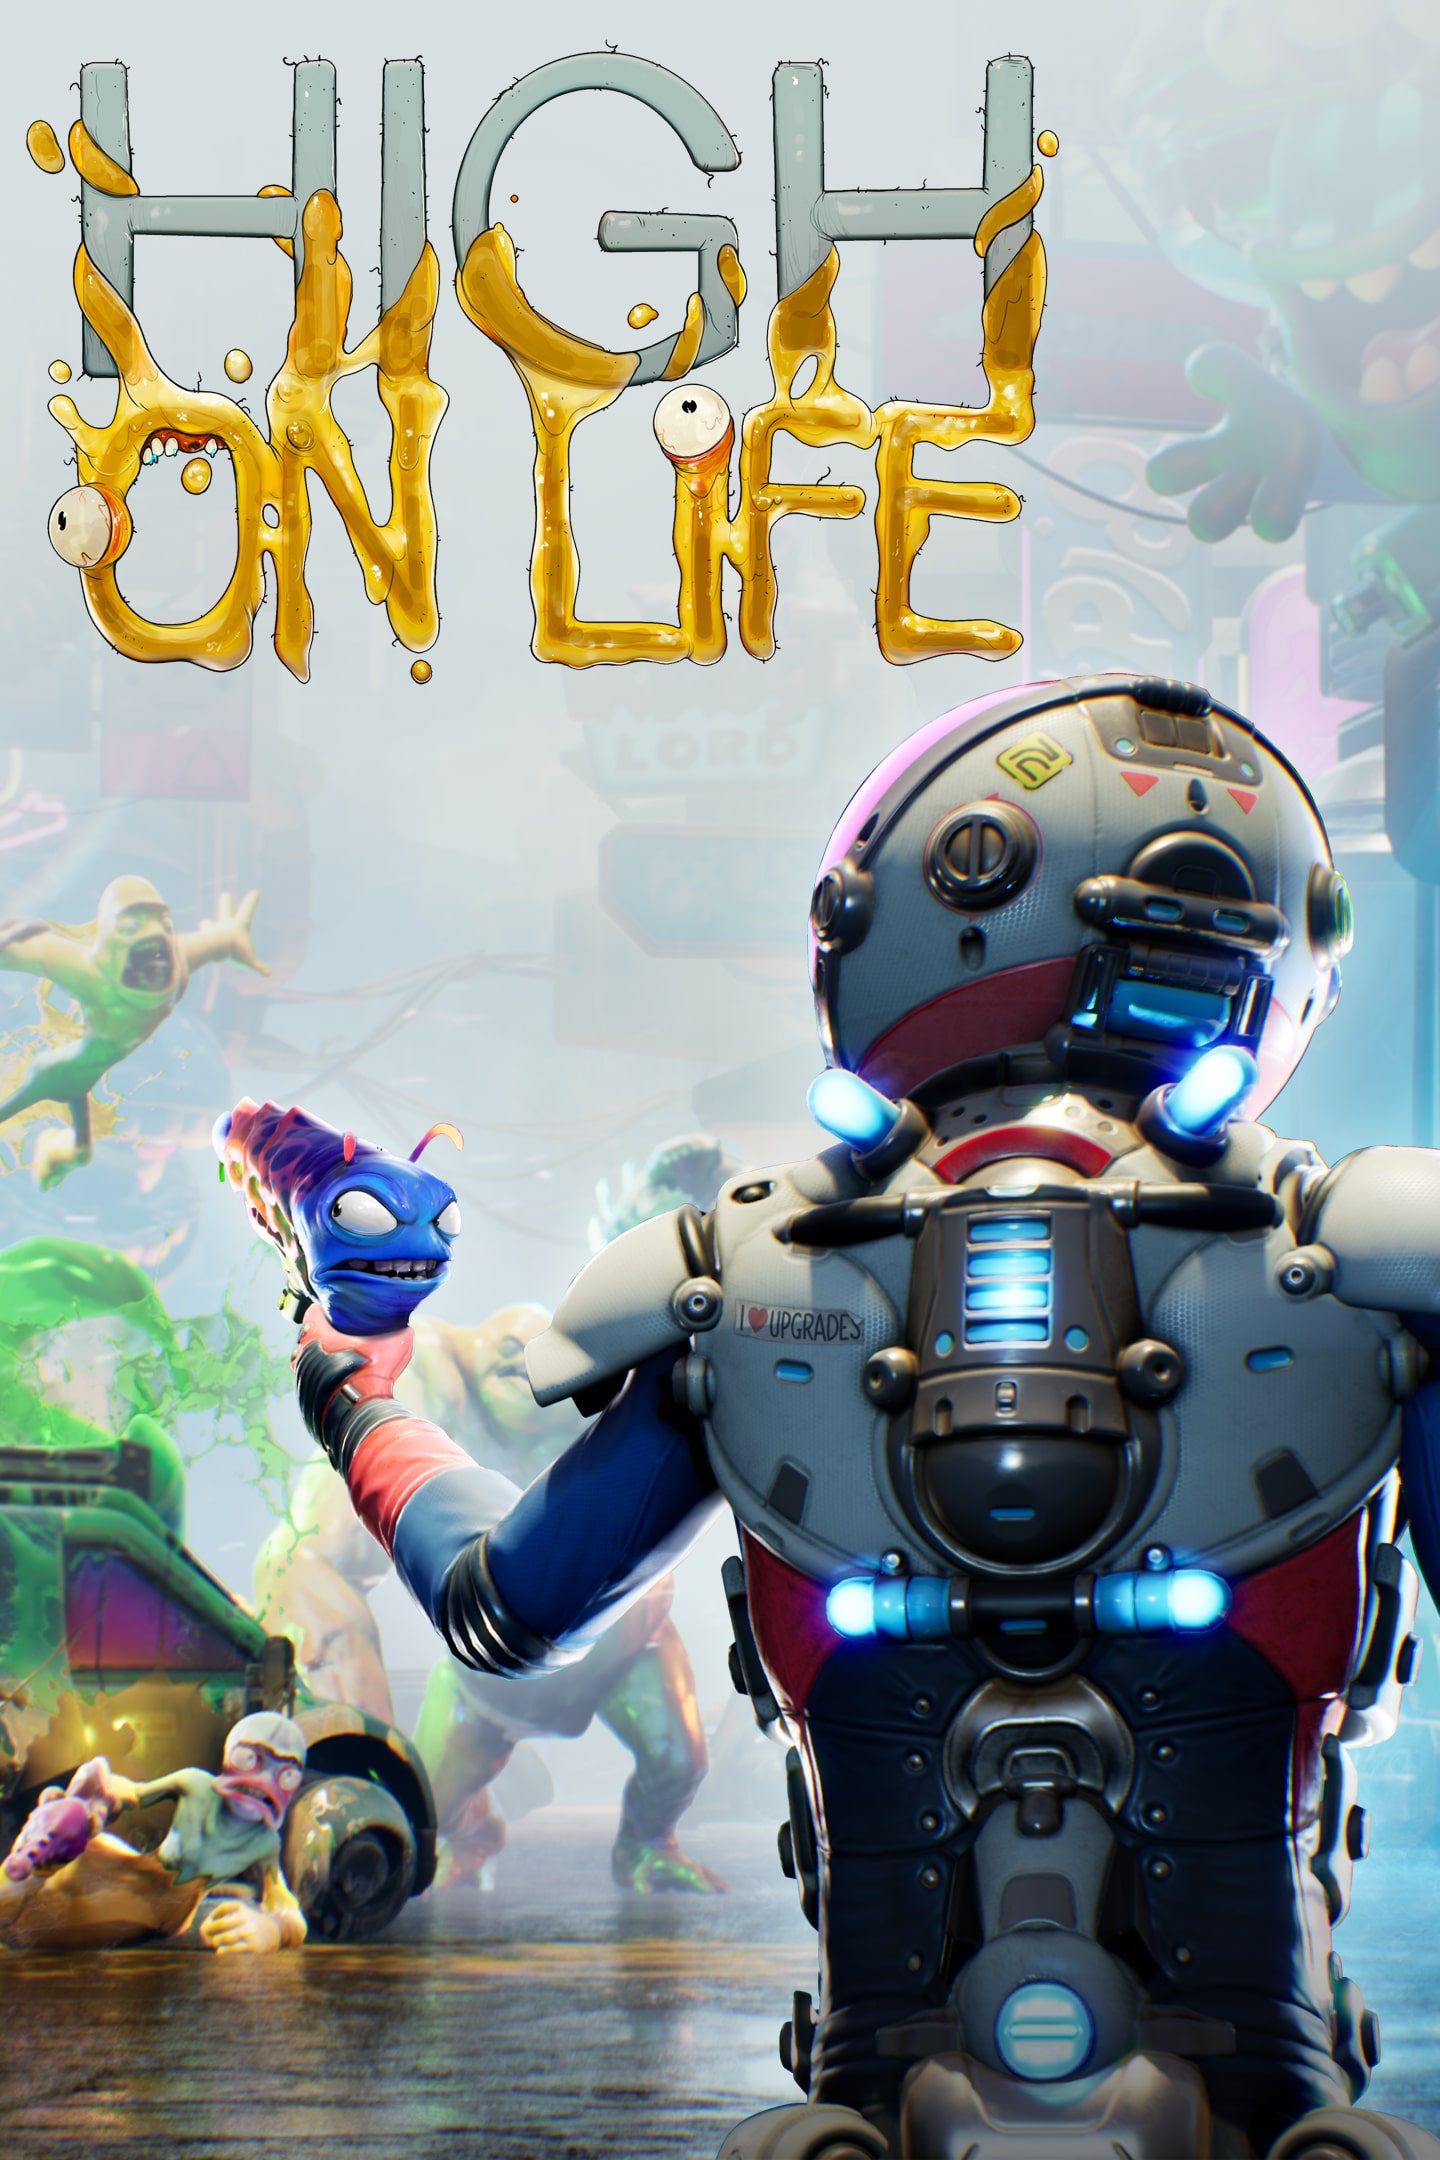 Is High on Life coming to PS5 or PS4?